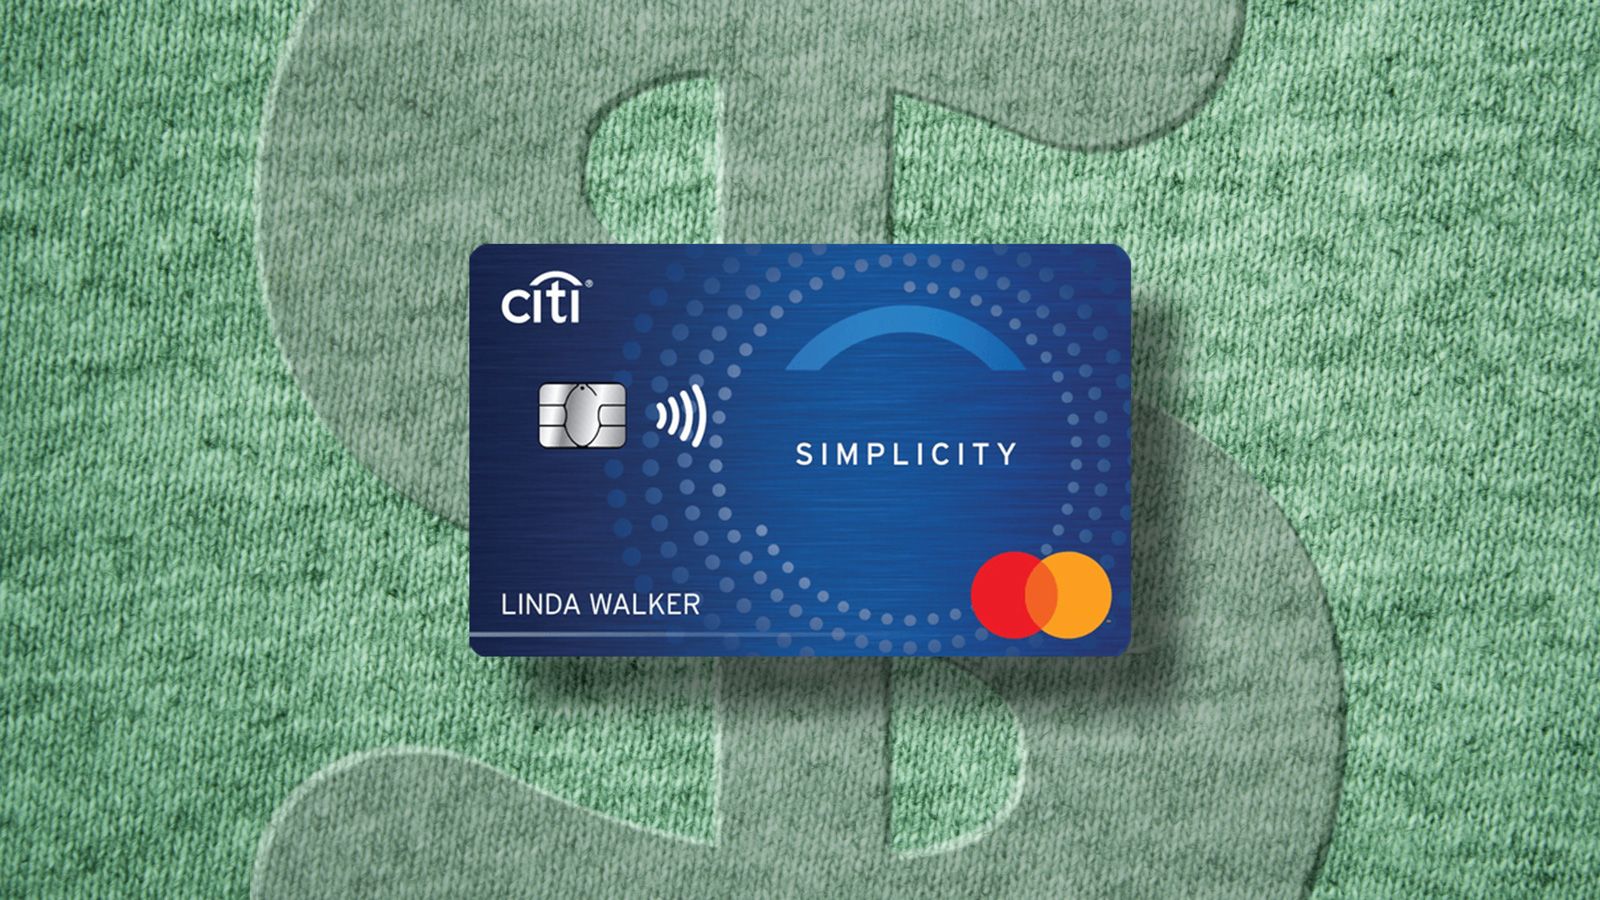 Profit a simple life with simplicity card